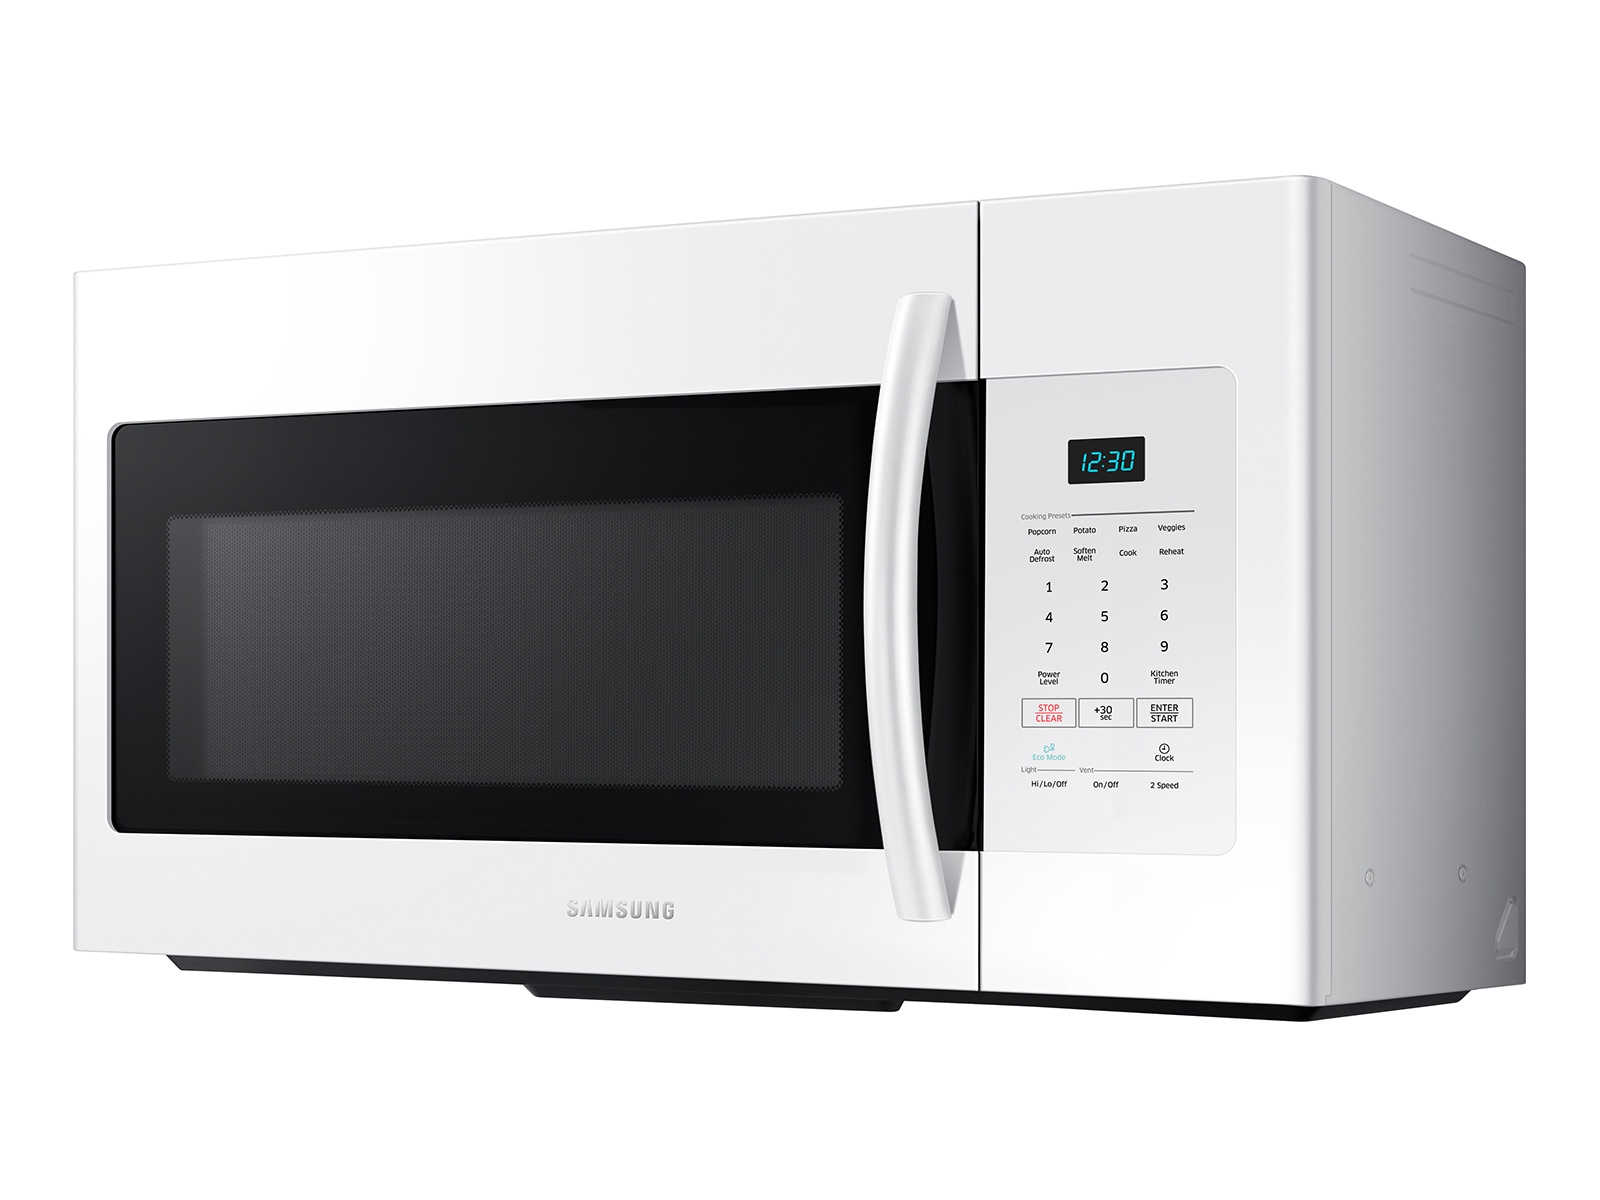 https://image-us.samsung.com/SamsungUS/home/home-appliances/microwaves/over-the-range/pdp/me16h702sew/gallery/10_Microwave_OTR_ME16H702SEW_R-Persepctive_Dynamic_Closed_White.jpg?$product-details-jpg$